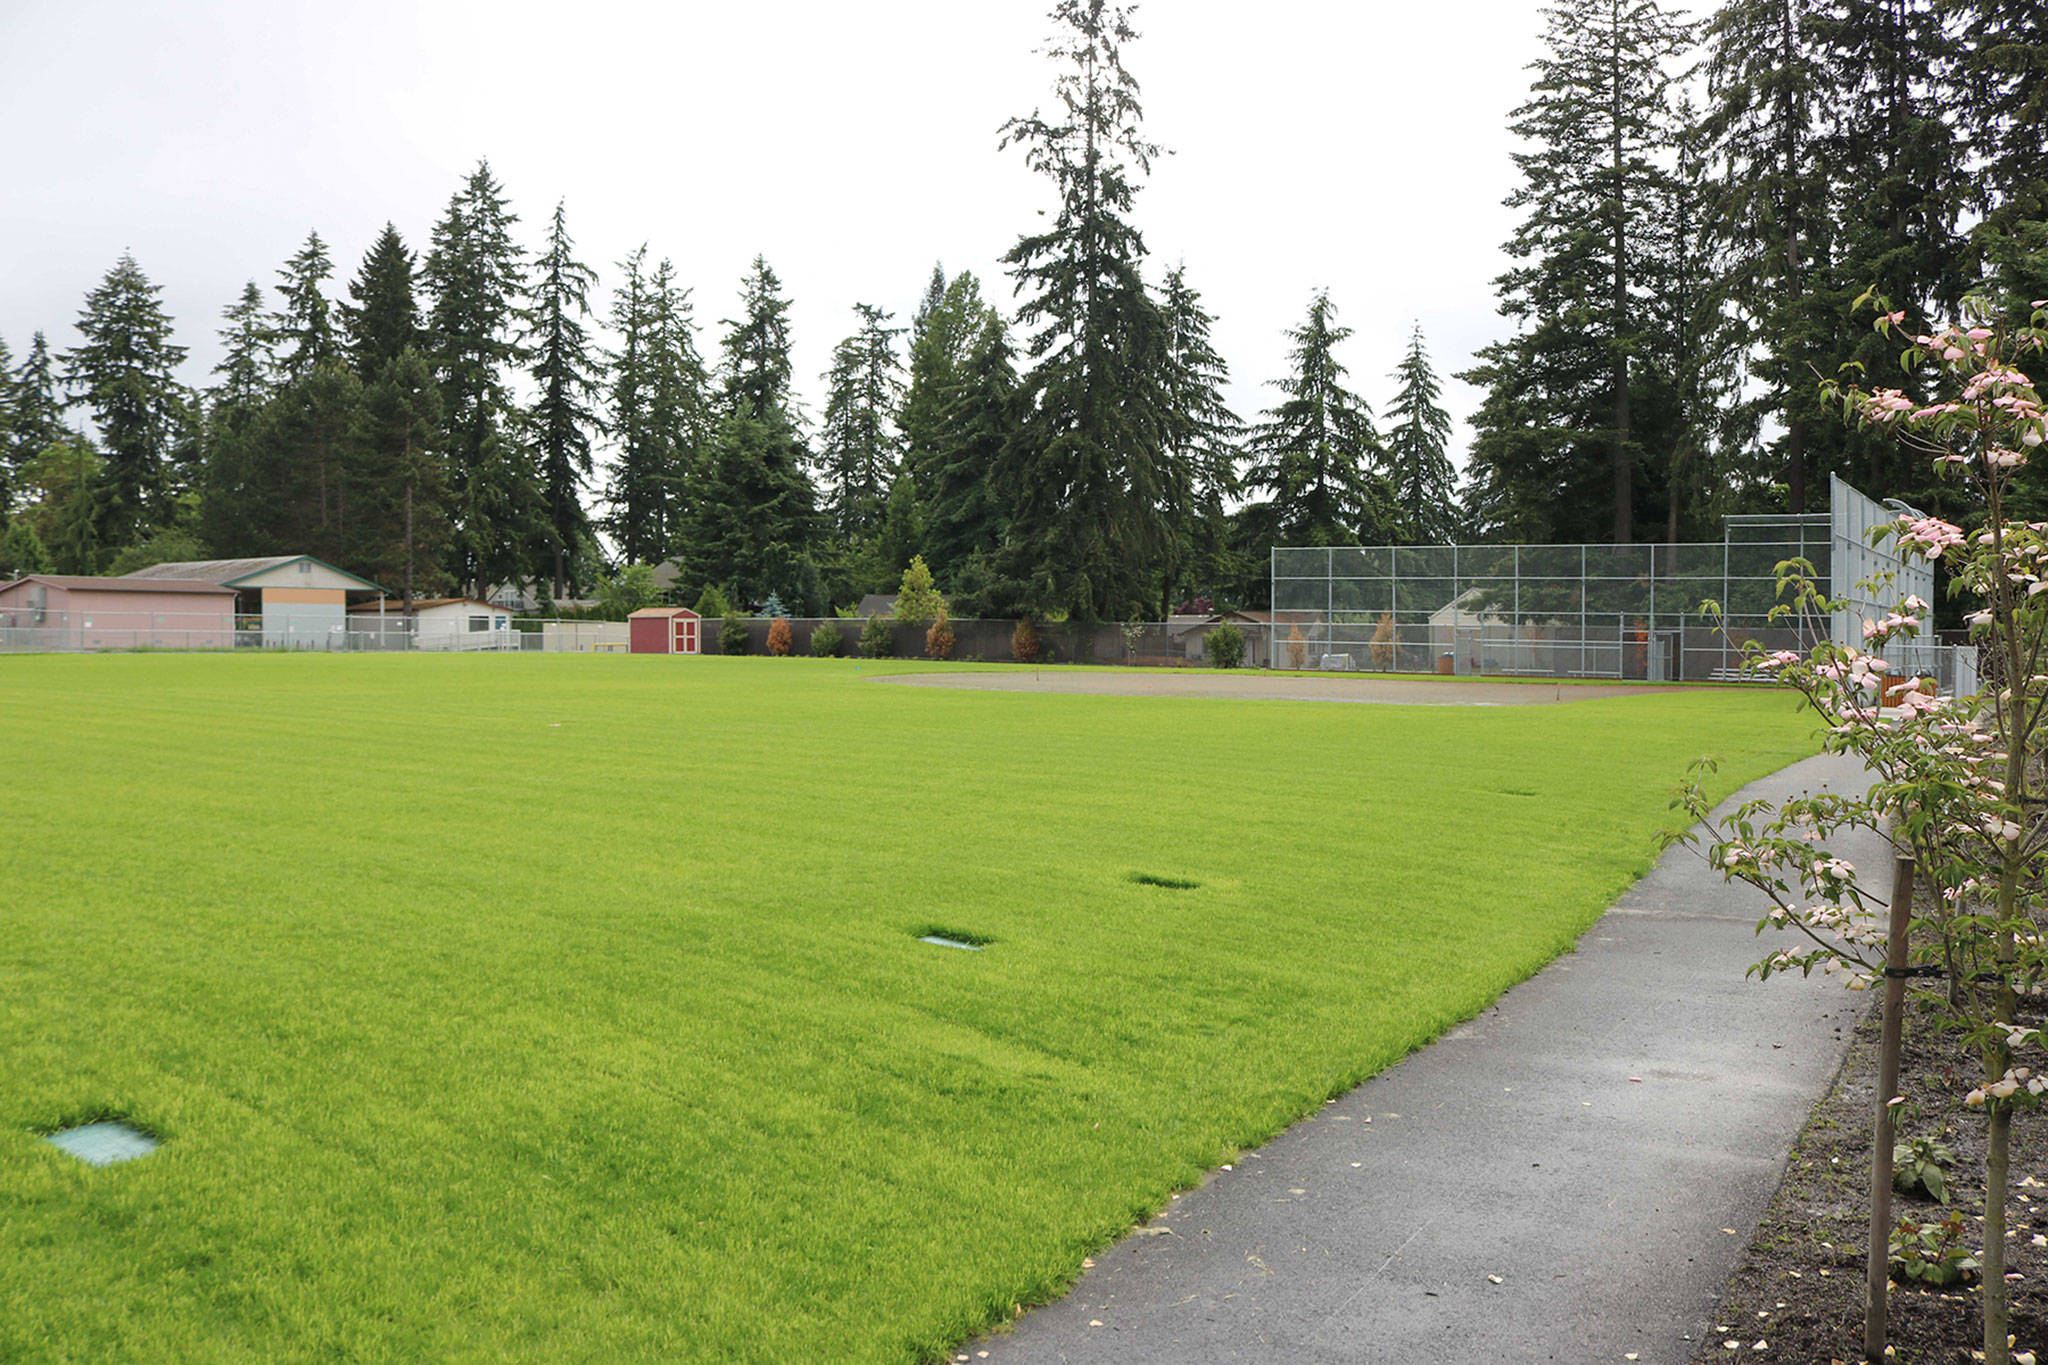 The ballfield at Moorlands Park will be the first owned and operated by the city of Kenmore. Photo courtesy of the city of Kenmore